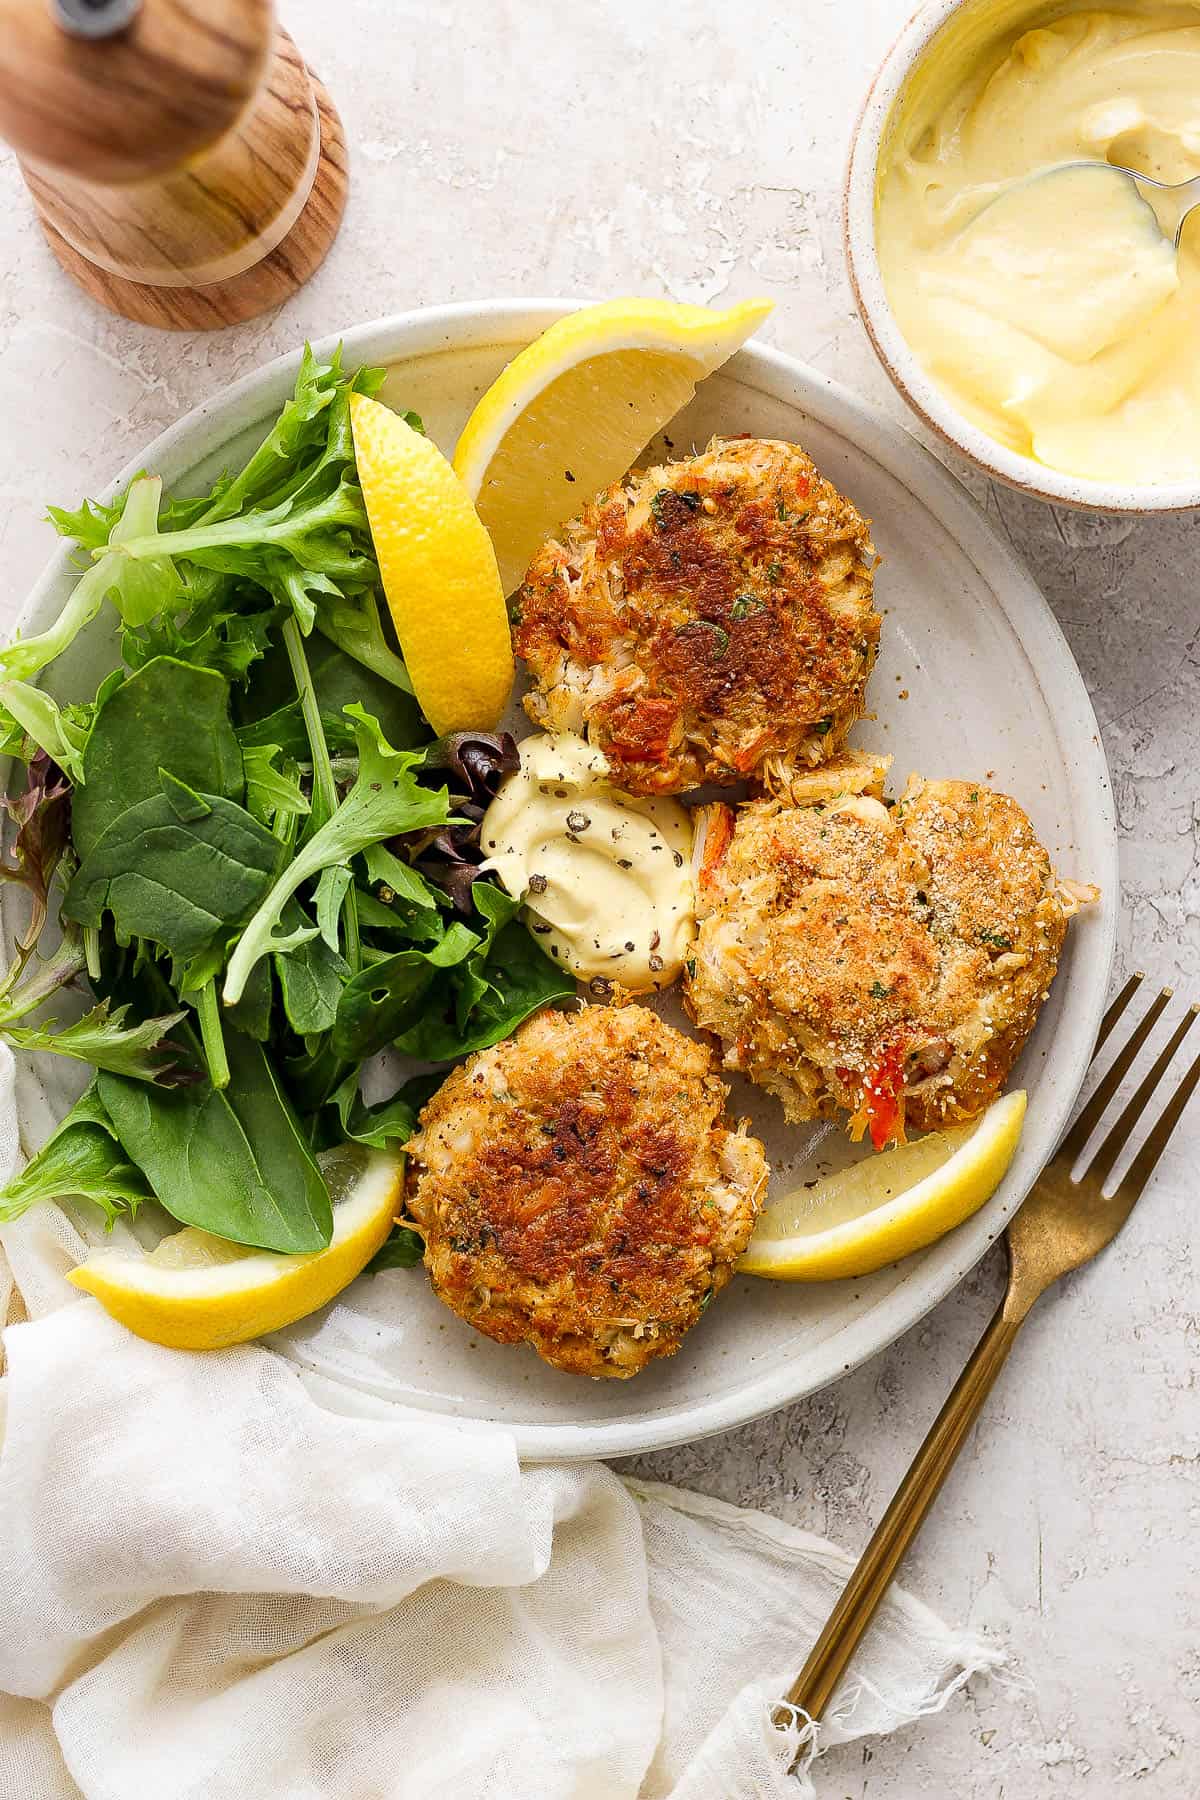 A plate of baked crab cakes with some salad and lemon wedges.